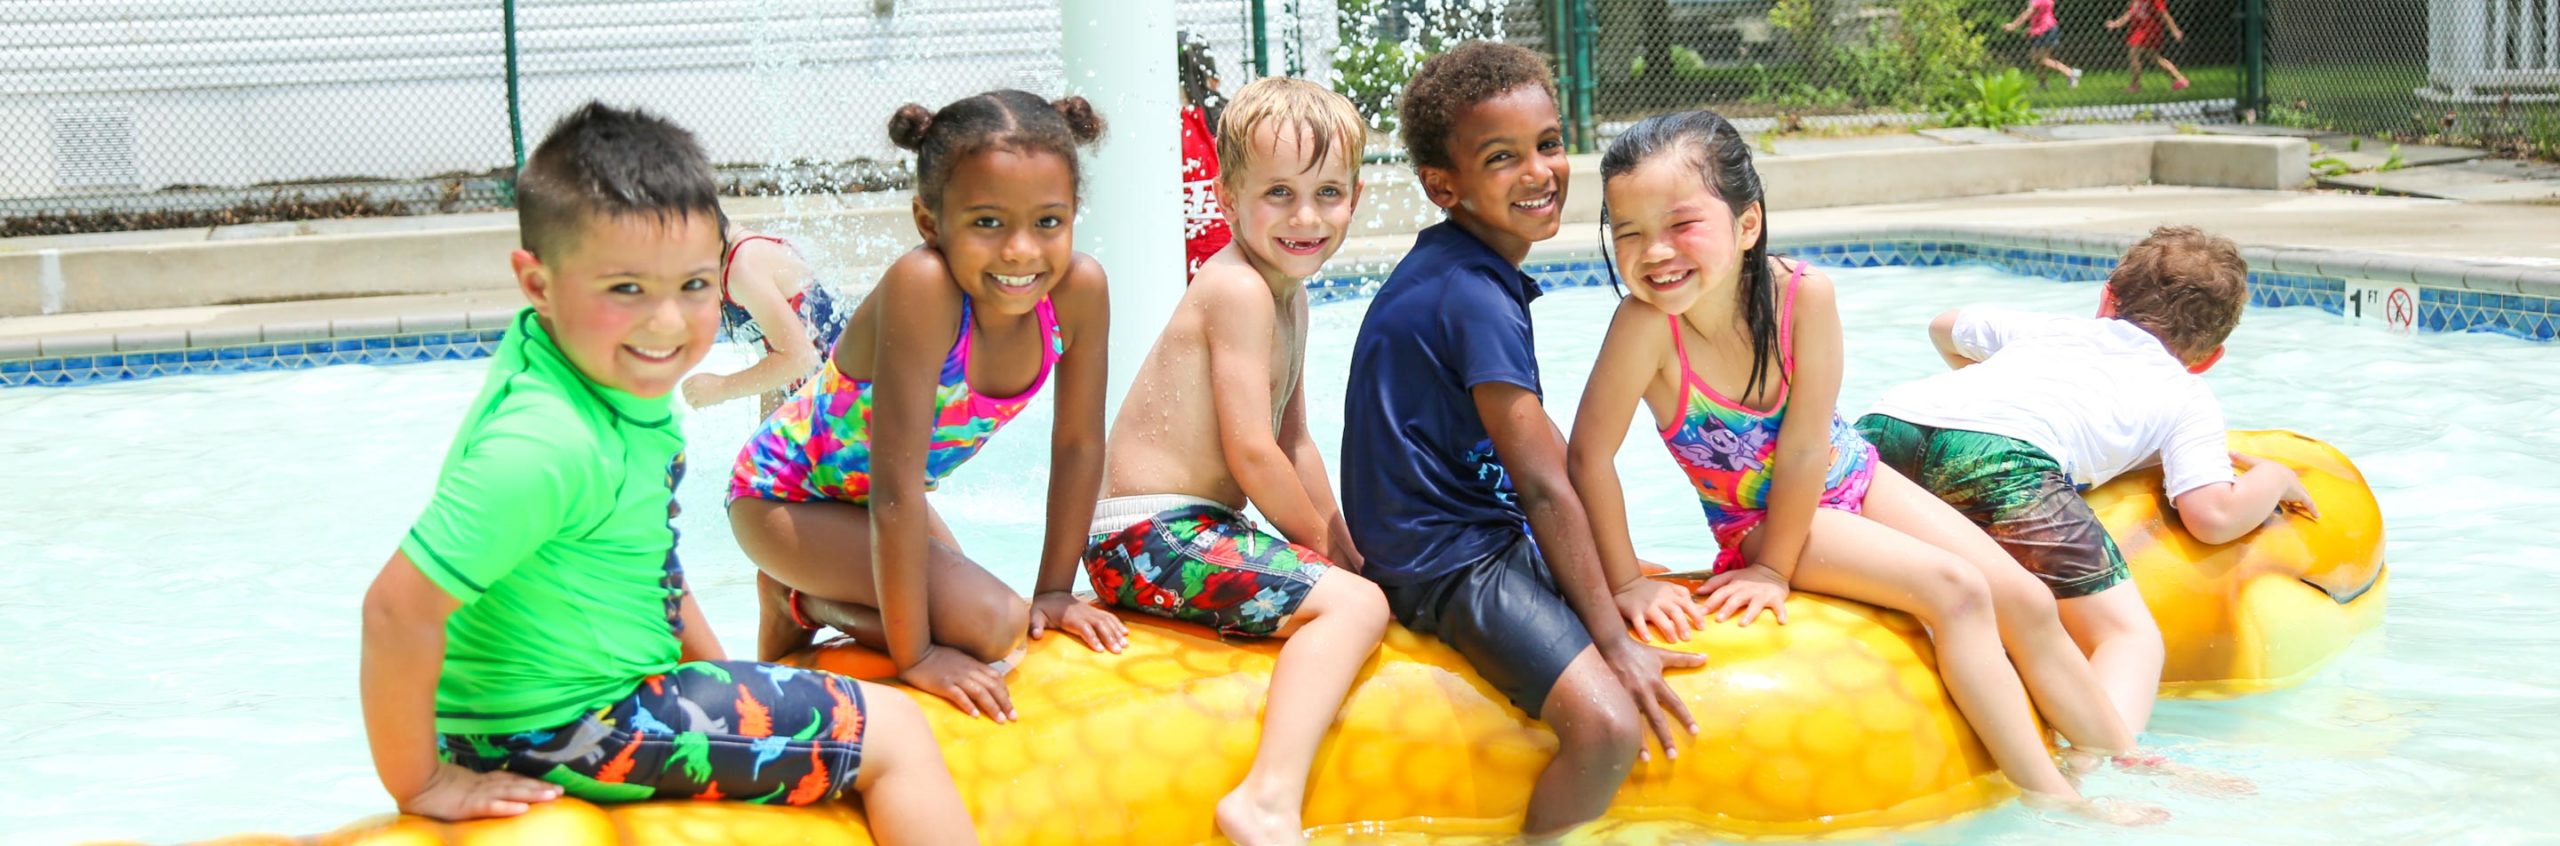 Five friends at a water park sitting on an inflatable toy in a shallow pool